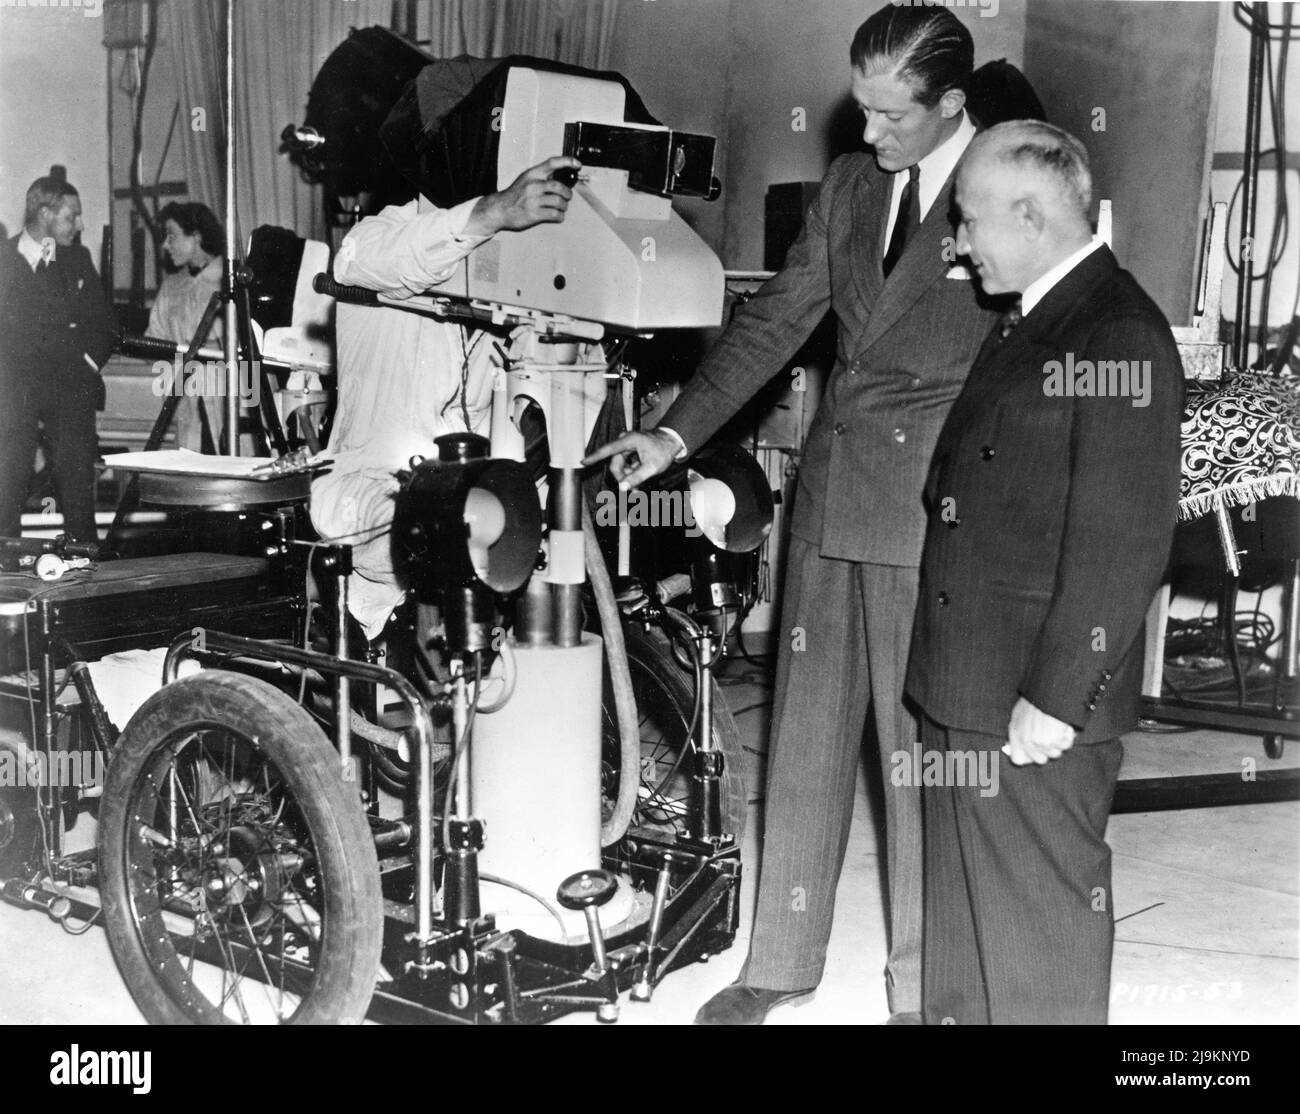 GERALD COOK shows Paramount Pictures Executive / Chairman of the Board ADOLPH ZUKOR the new EMITRON CAMERA at the BBC TELEVISION STATION / STUDIO / PLANT at ALEXANDRA PALACE in North London during his visit there in late 1937 publicity for Paramount Pictures Stock Photo